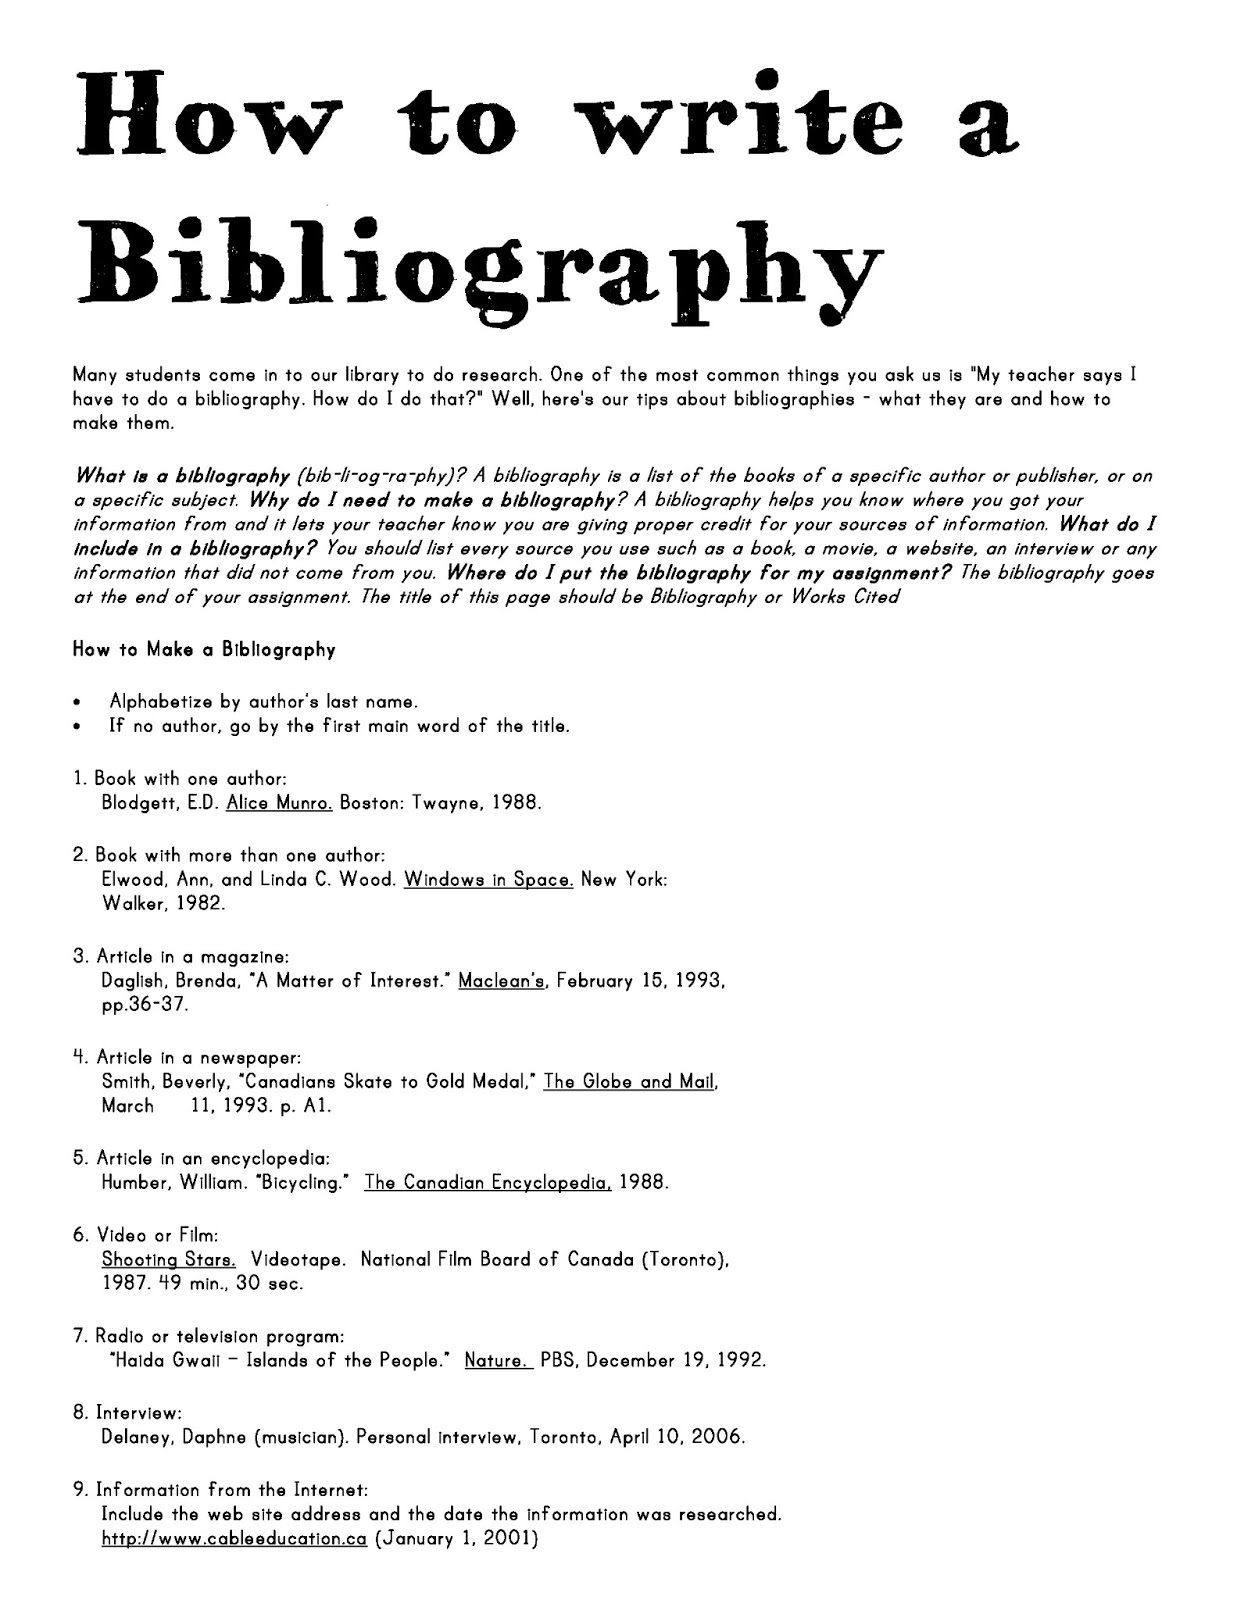 How to write a biblioaugraphy